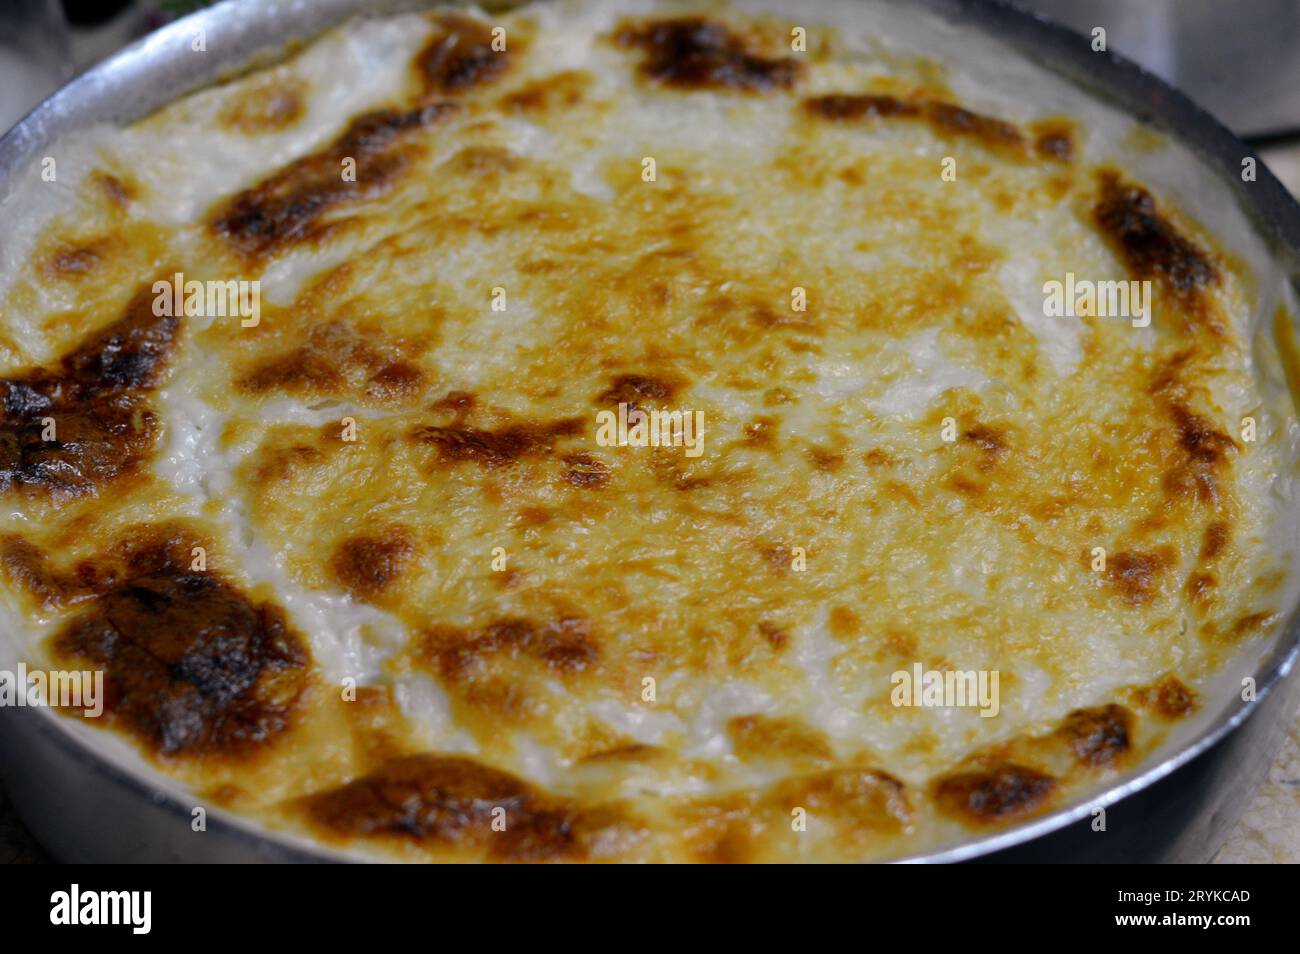 Baked Egyptian rice or Roz muammar's combination of rice, fresh cream, milk, ghee or butter, a very popular Egyptian dish, a simple, sumptuous Egyptia Stock Photo